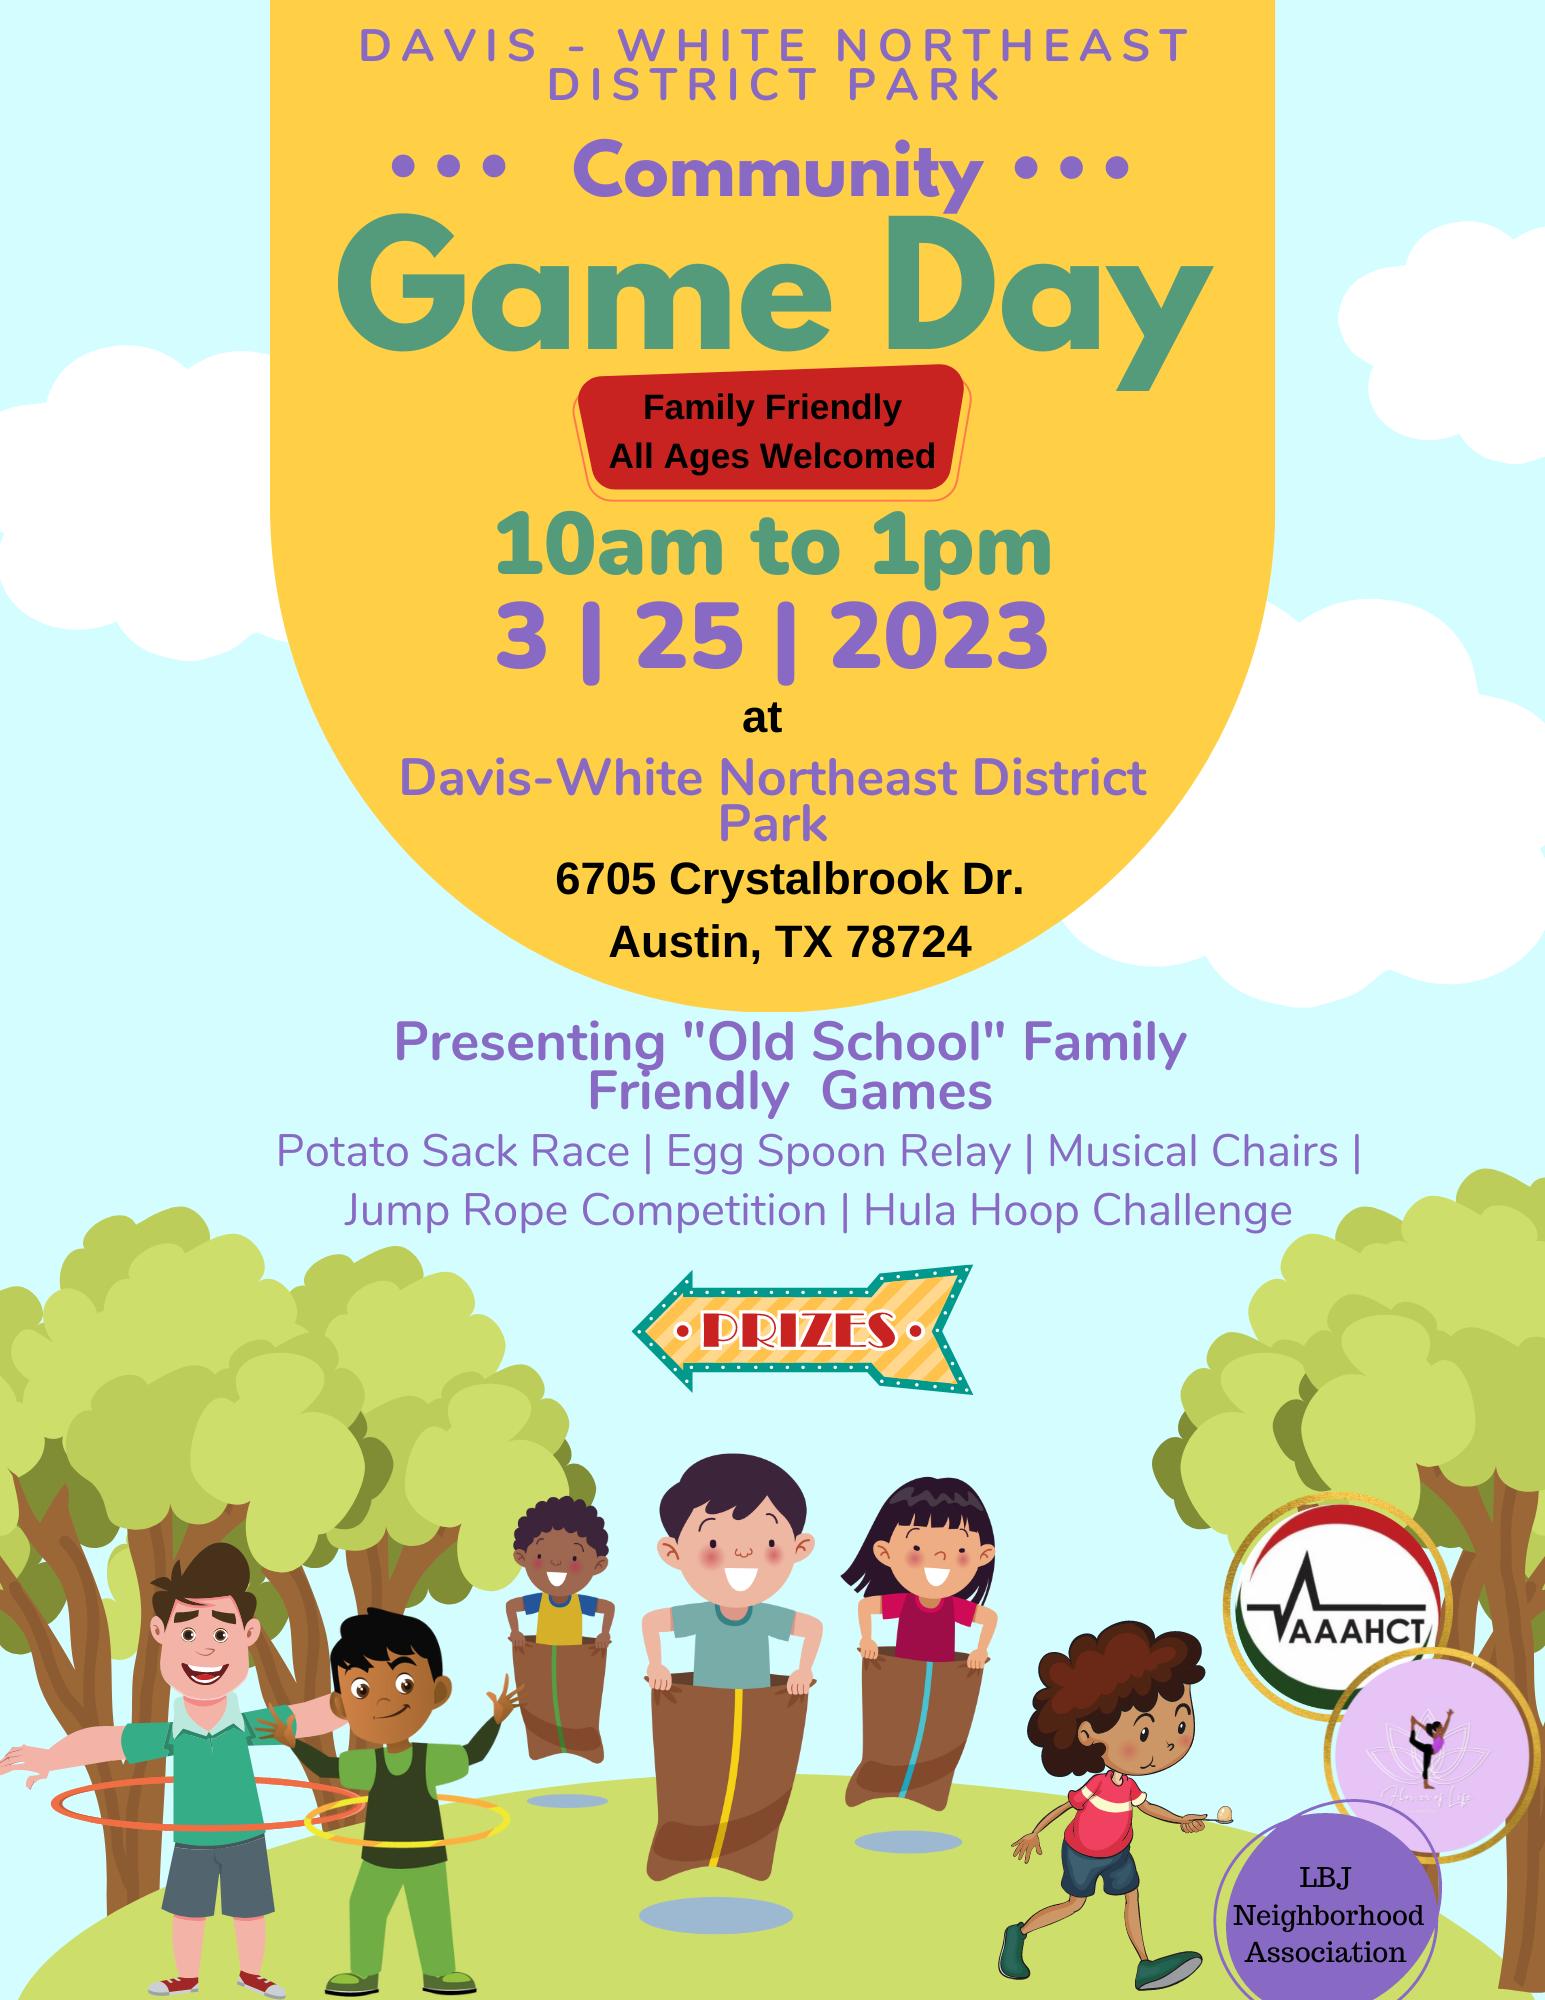 Community Game Day